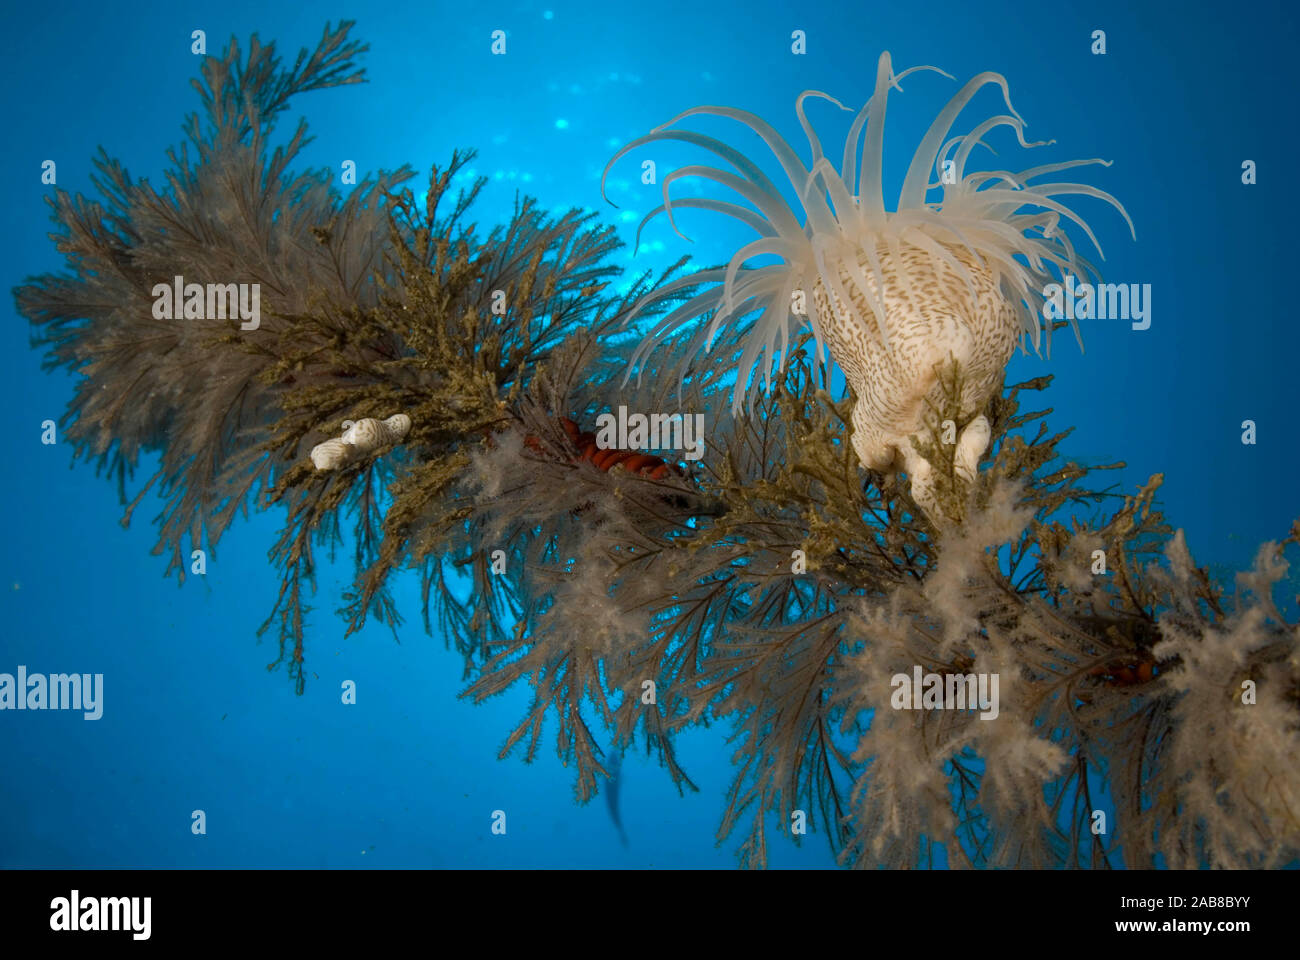 Tiger anemone (Nemanthus sp.), on branch of black coral (Antipathes sp.) at a depth of 34 m. Also known as Wandering anemones as they can drift throug Stock Photo